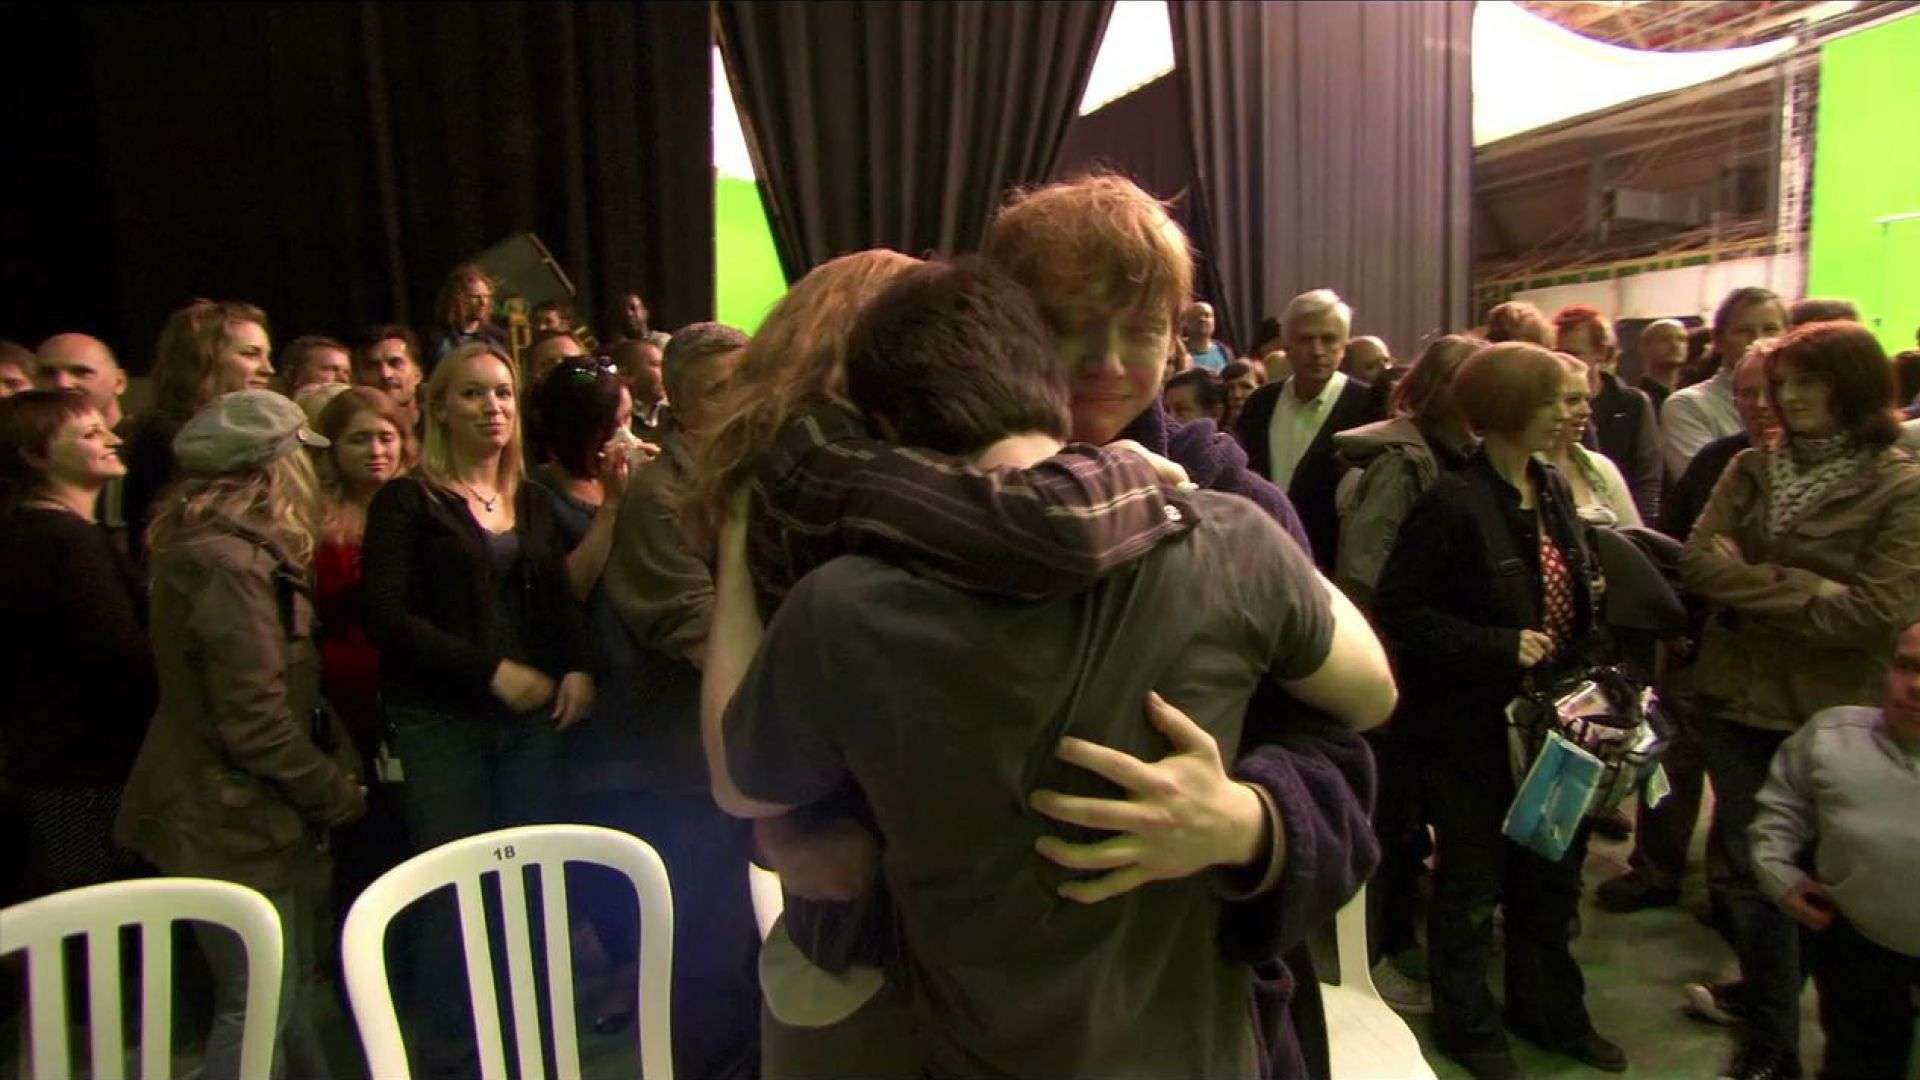 After filming the last scene in Deathly Hallows